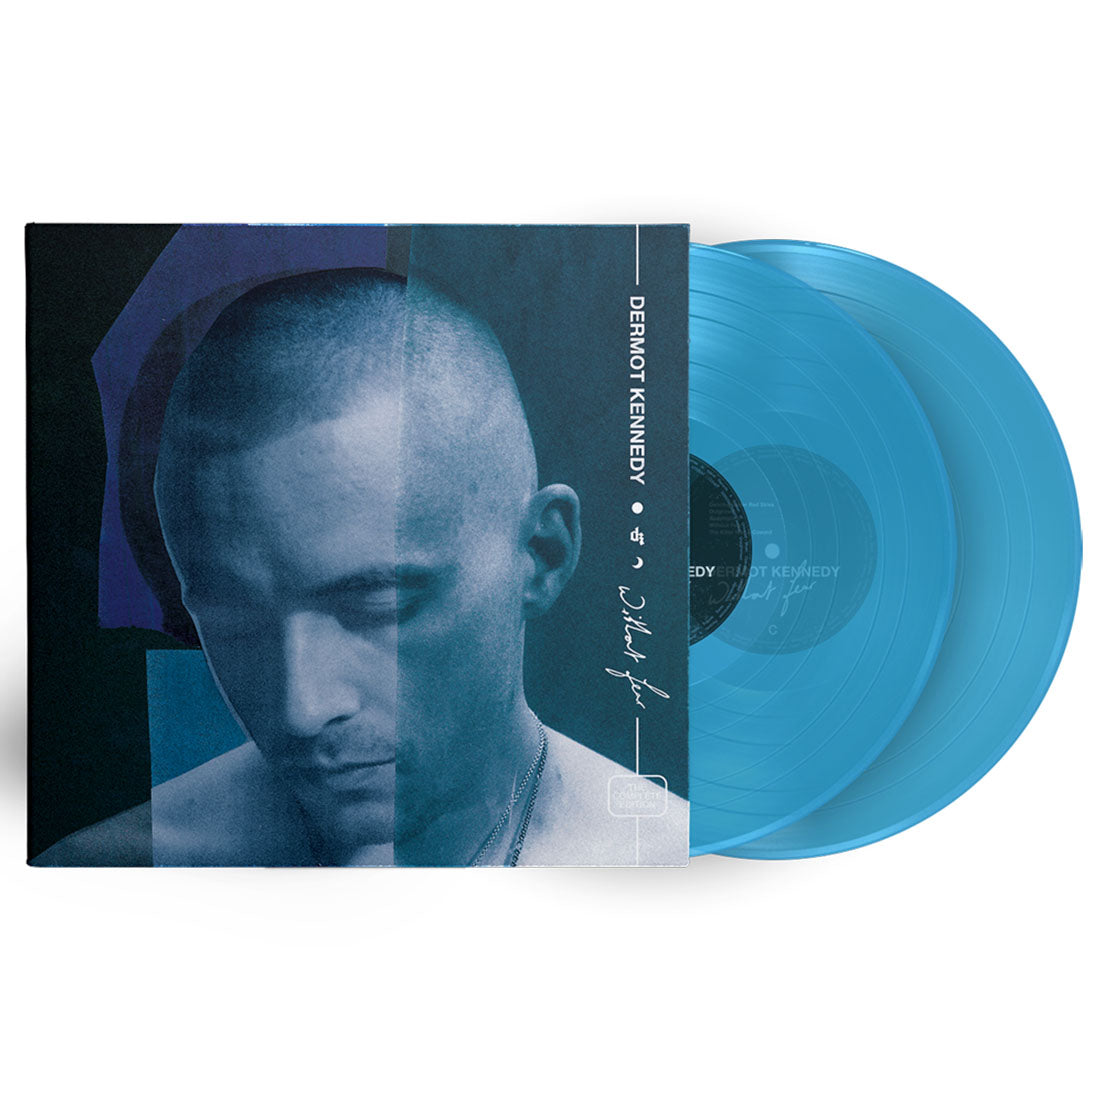 Dermot Kennedy - Without Fear: The Complete Edition Blue Double LP ...